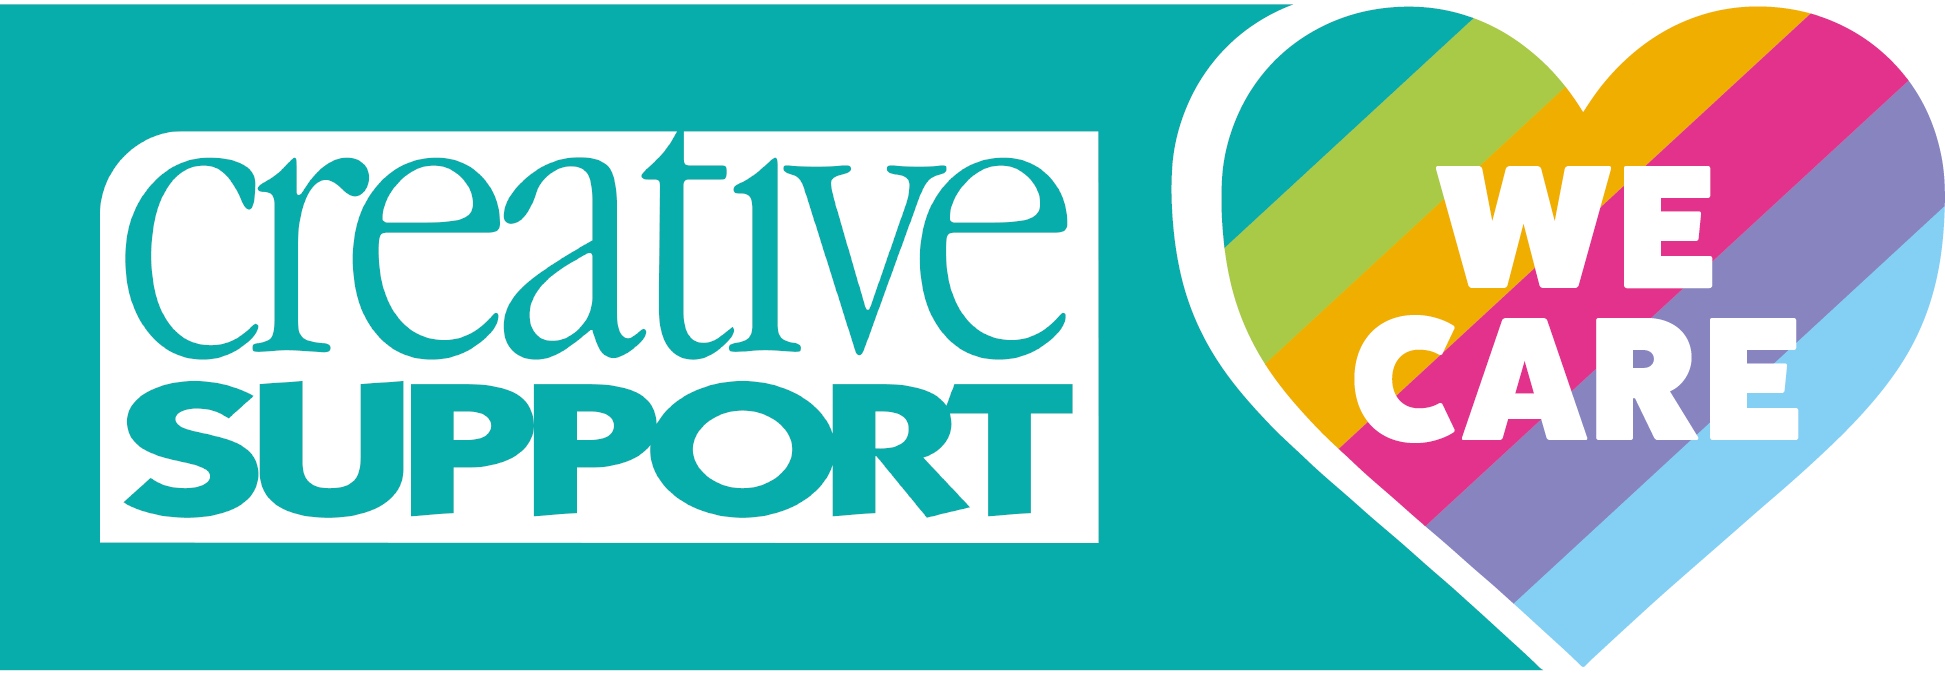 Creative Support logo with a link to their website